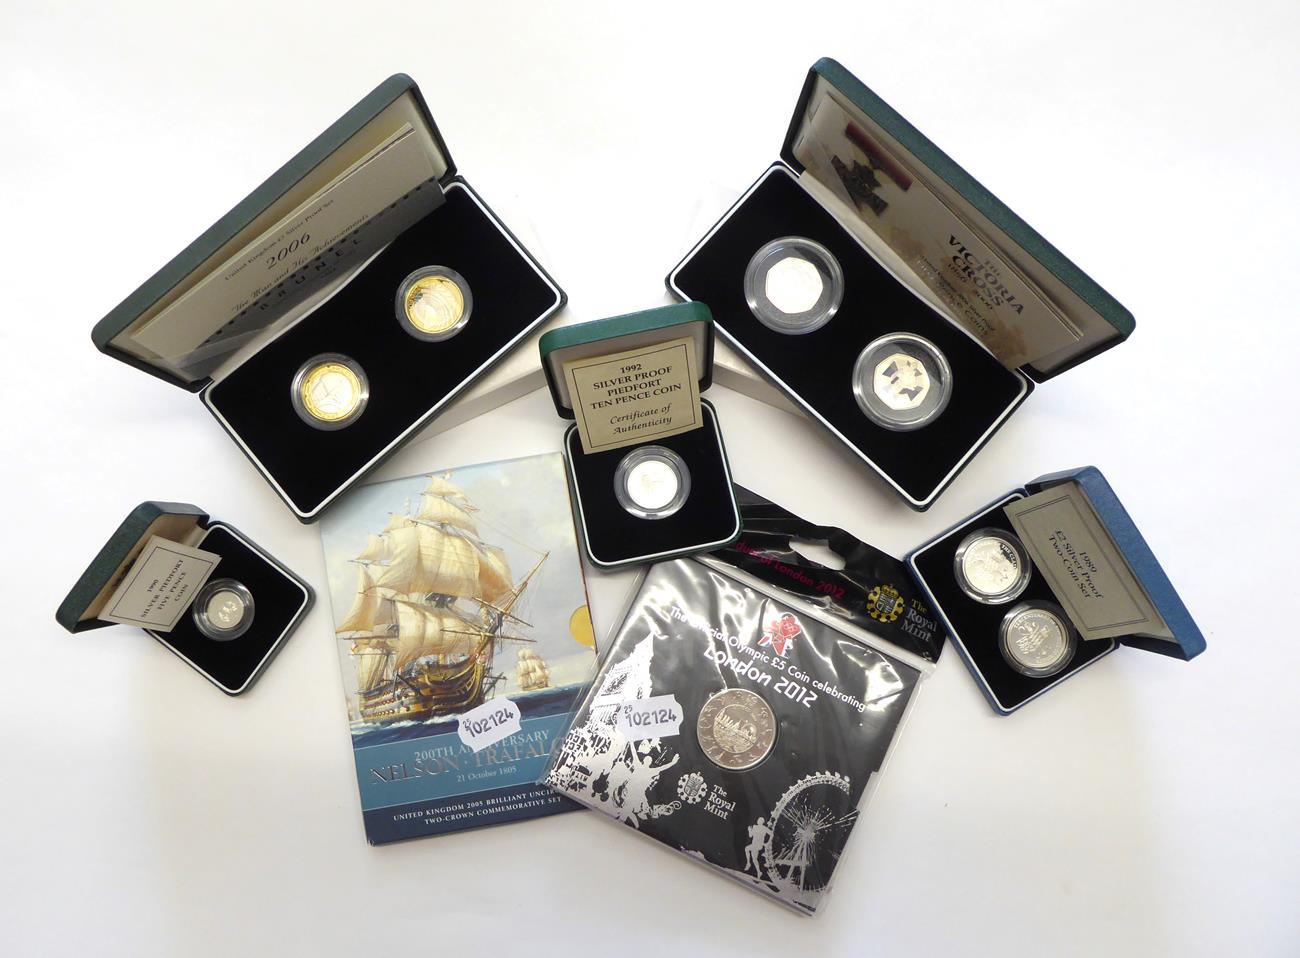 Lot 2105 - Royal Mint Silver Proof UK Coins 2006 Victoria Cross 2-Coin 50p Set, 2006 Brunel 2-Coin £2...